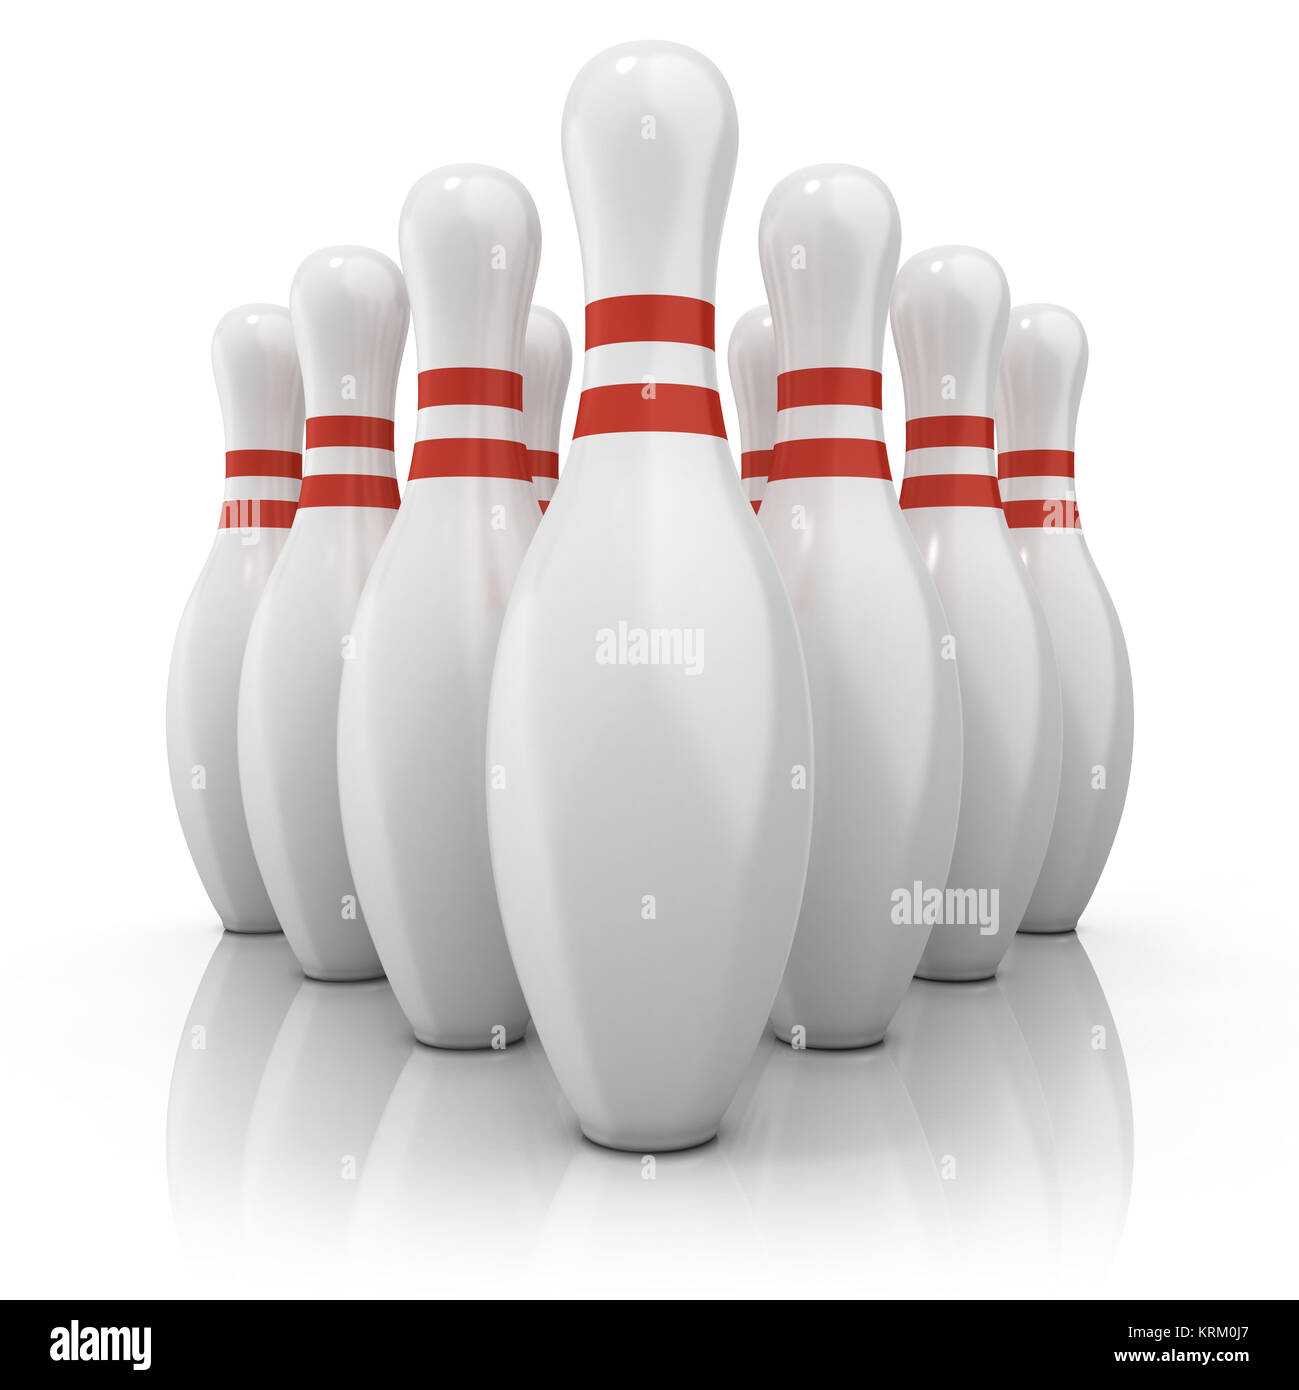 10 pin bowling Cut Out Stock Images & Pictures - Alamy